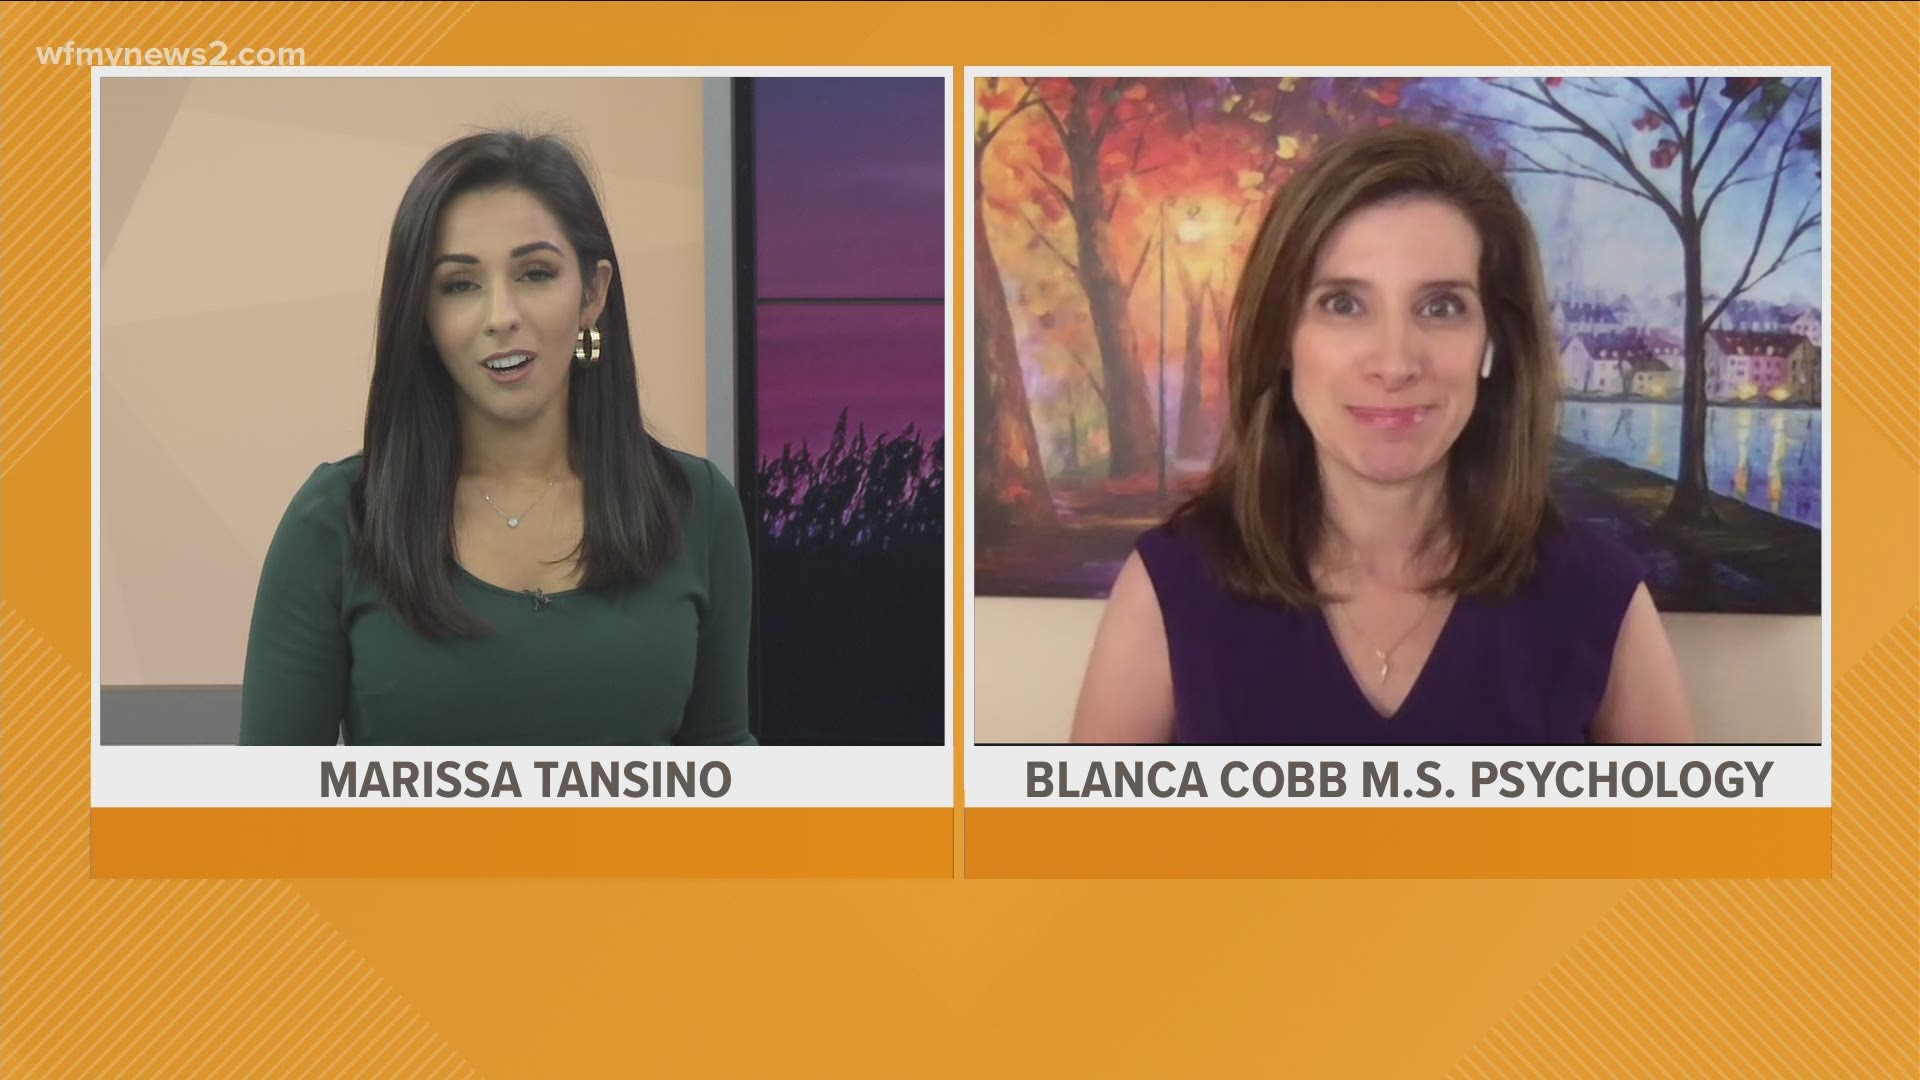 Body language expert, Blanca Cobb talks about how to make the most of the time spent with children.